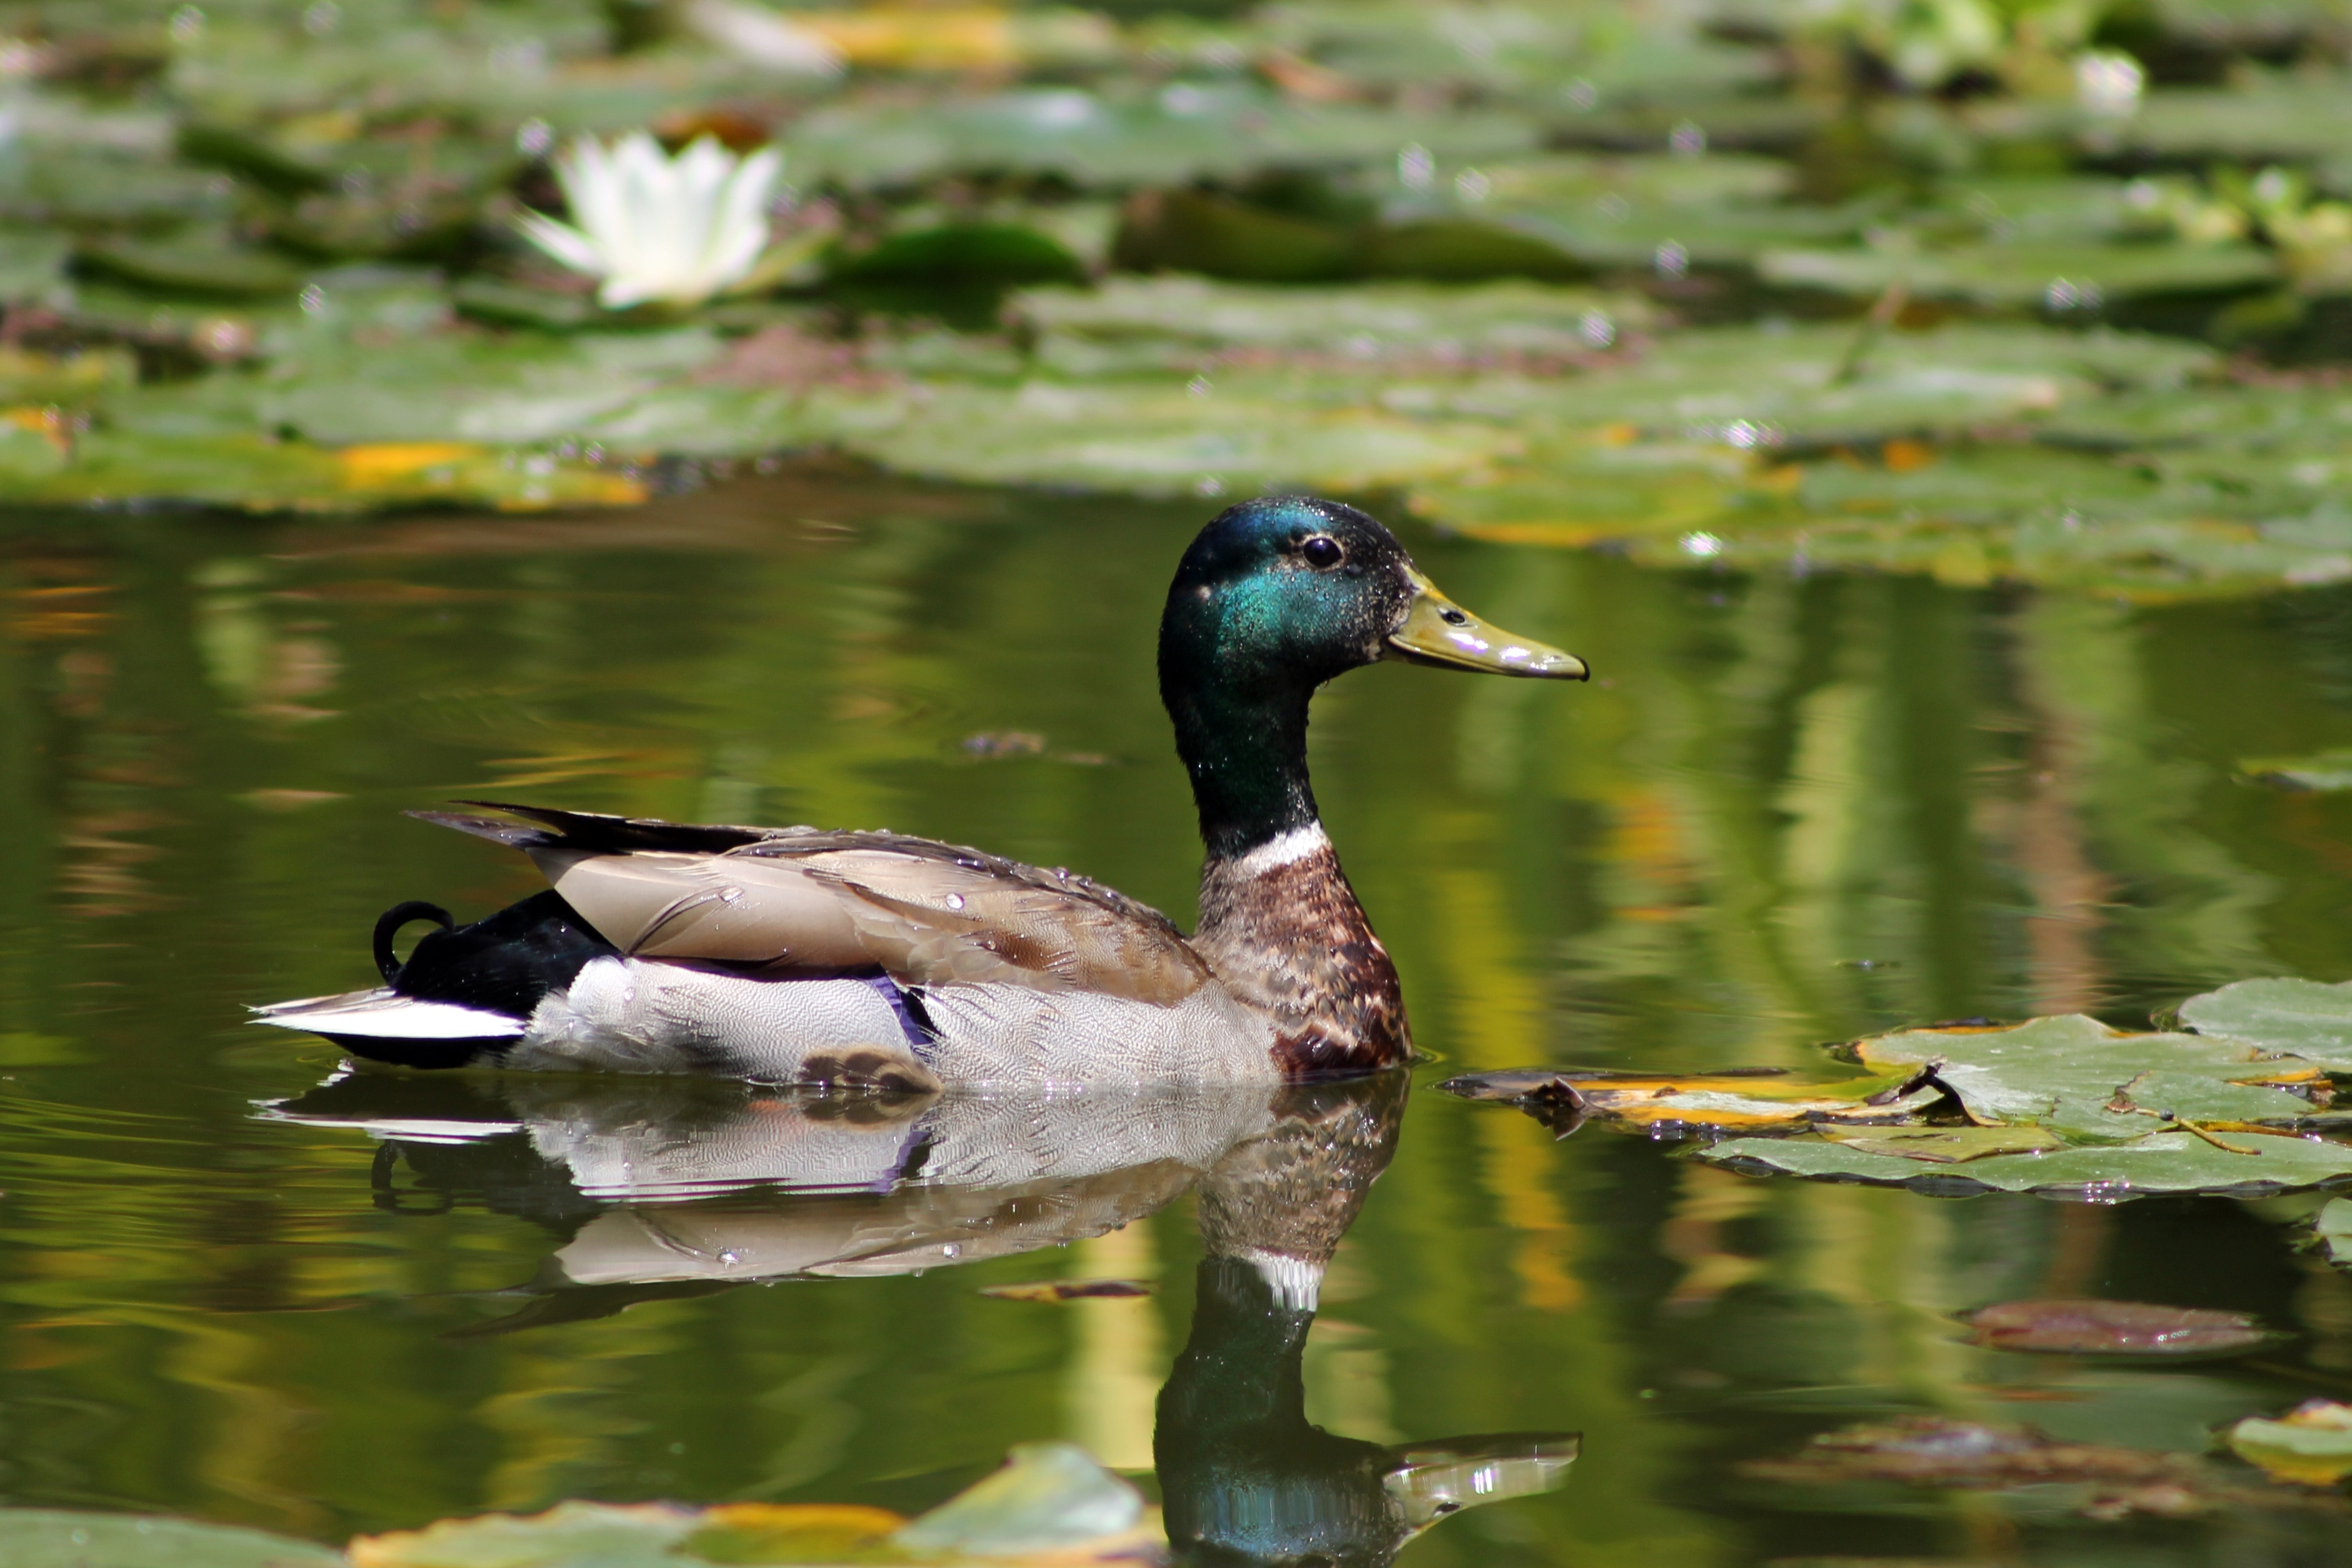 male mallard duck on body of water during daytime